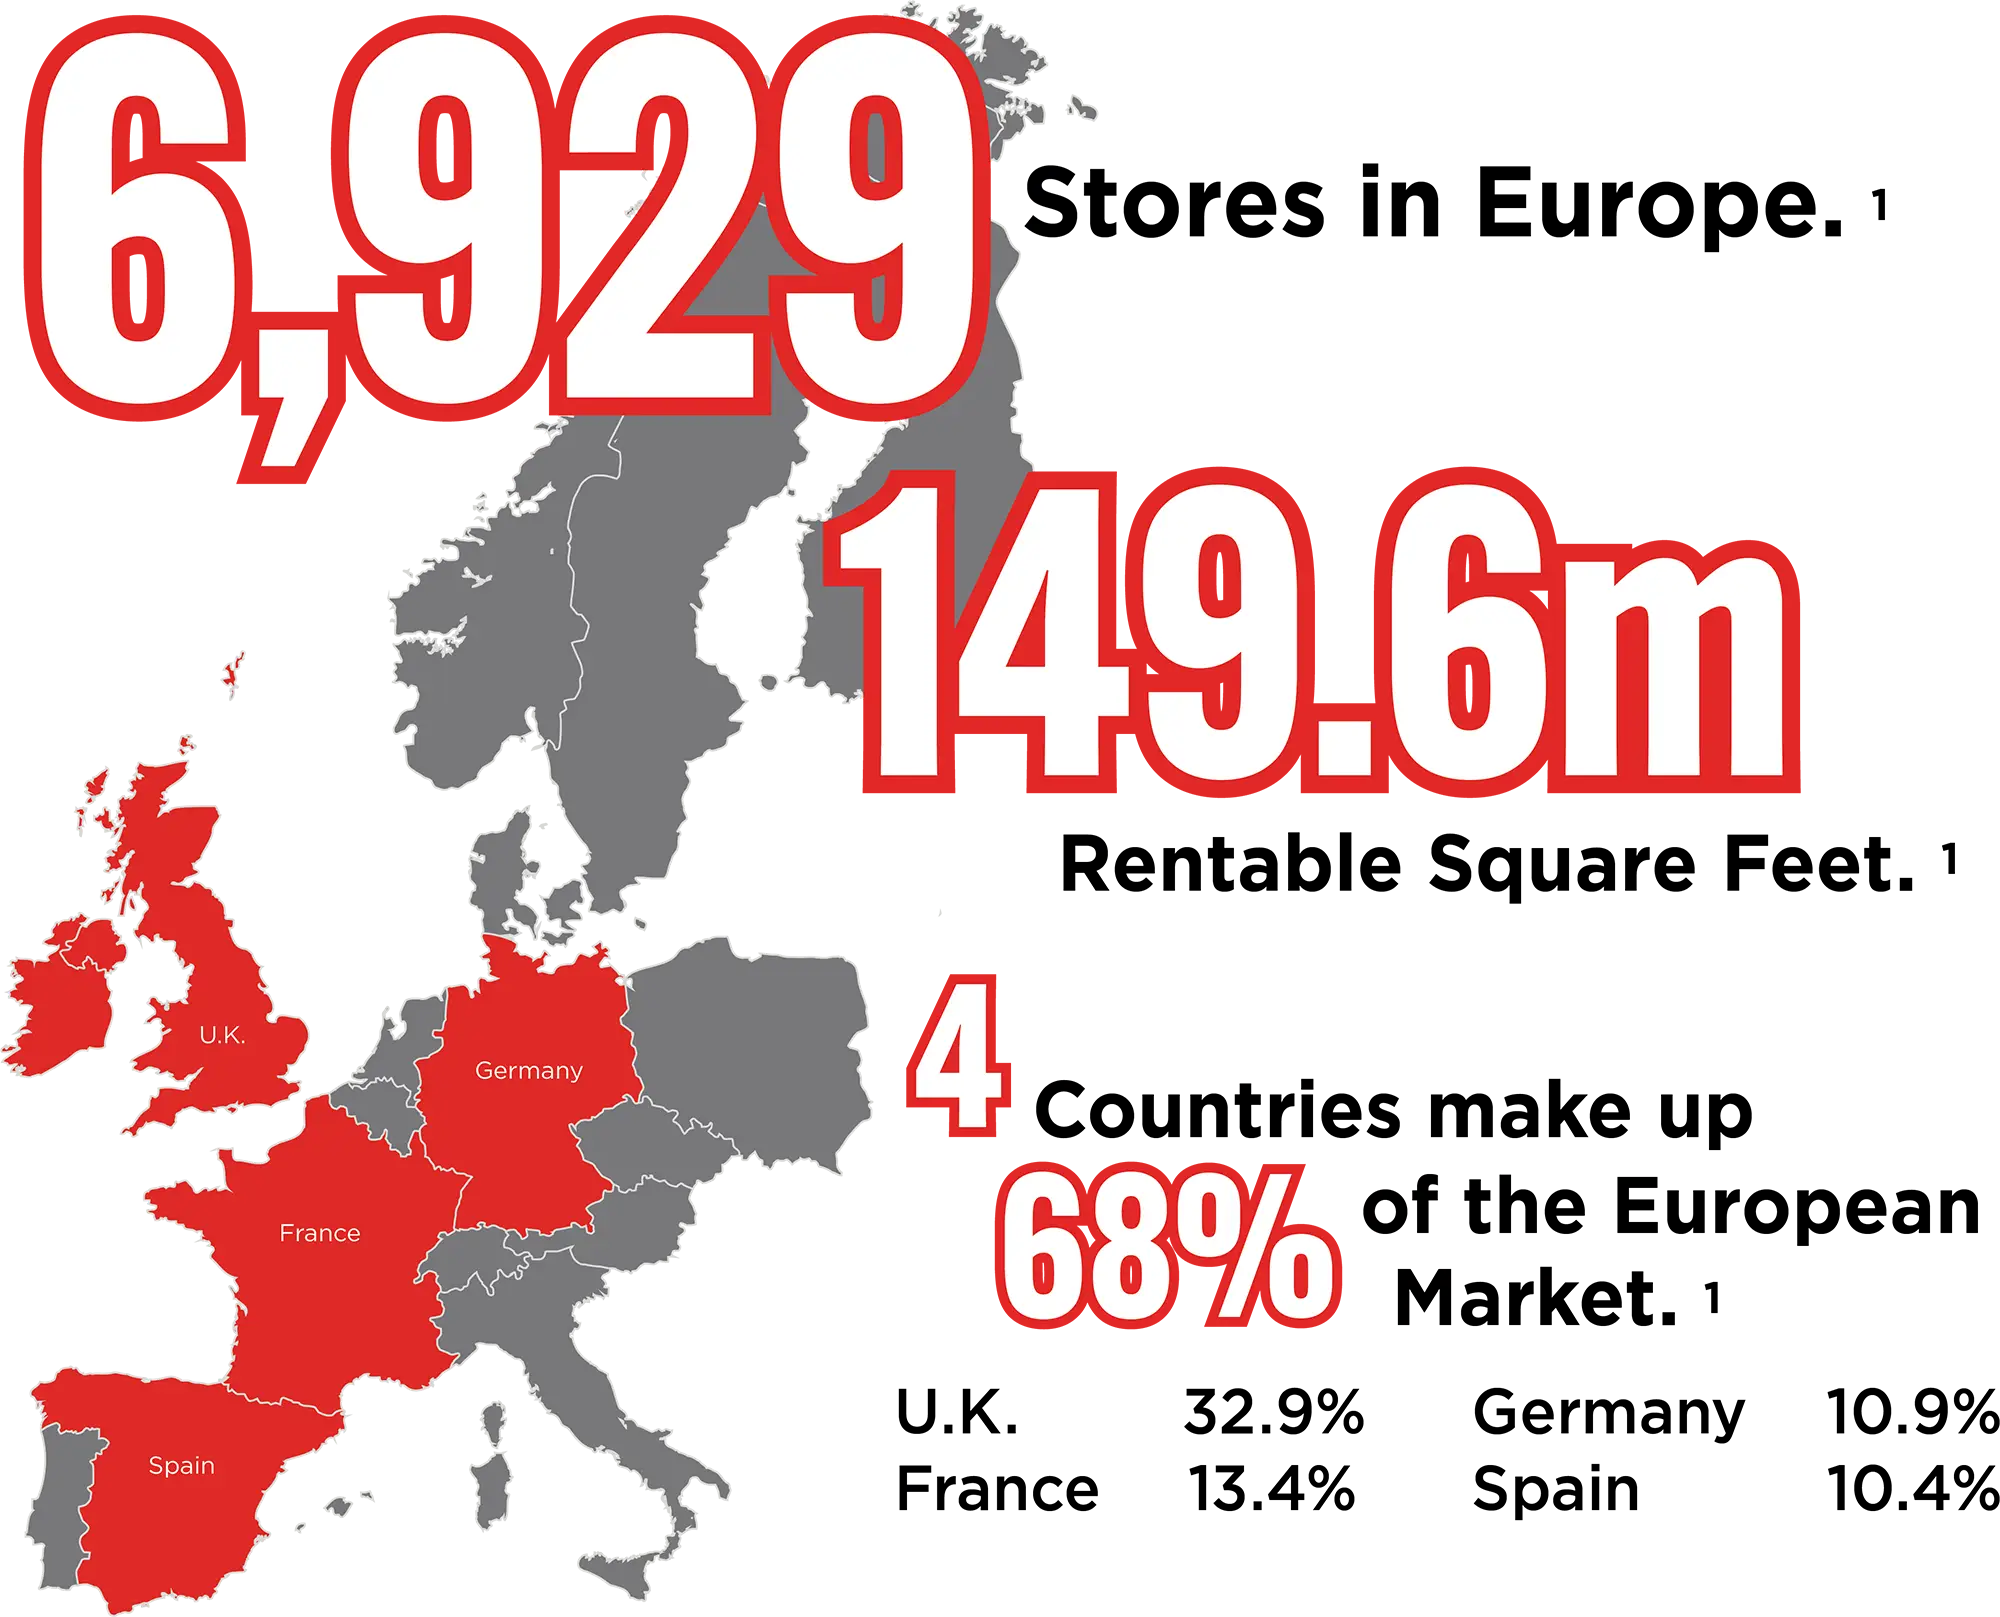 6,929 Stores in Europe. 149.6m Rentable Square Feet. 4 Countries make up 68% of the European Market. U.K. 32.9%. France 13.4%. Germany 10.9%. Spain 10.4%.